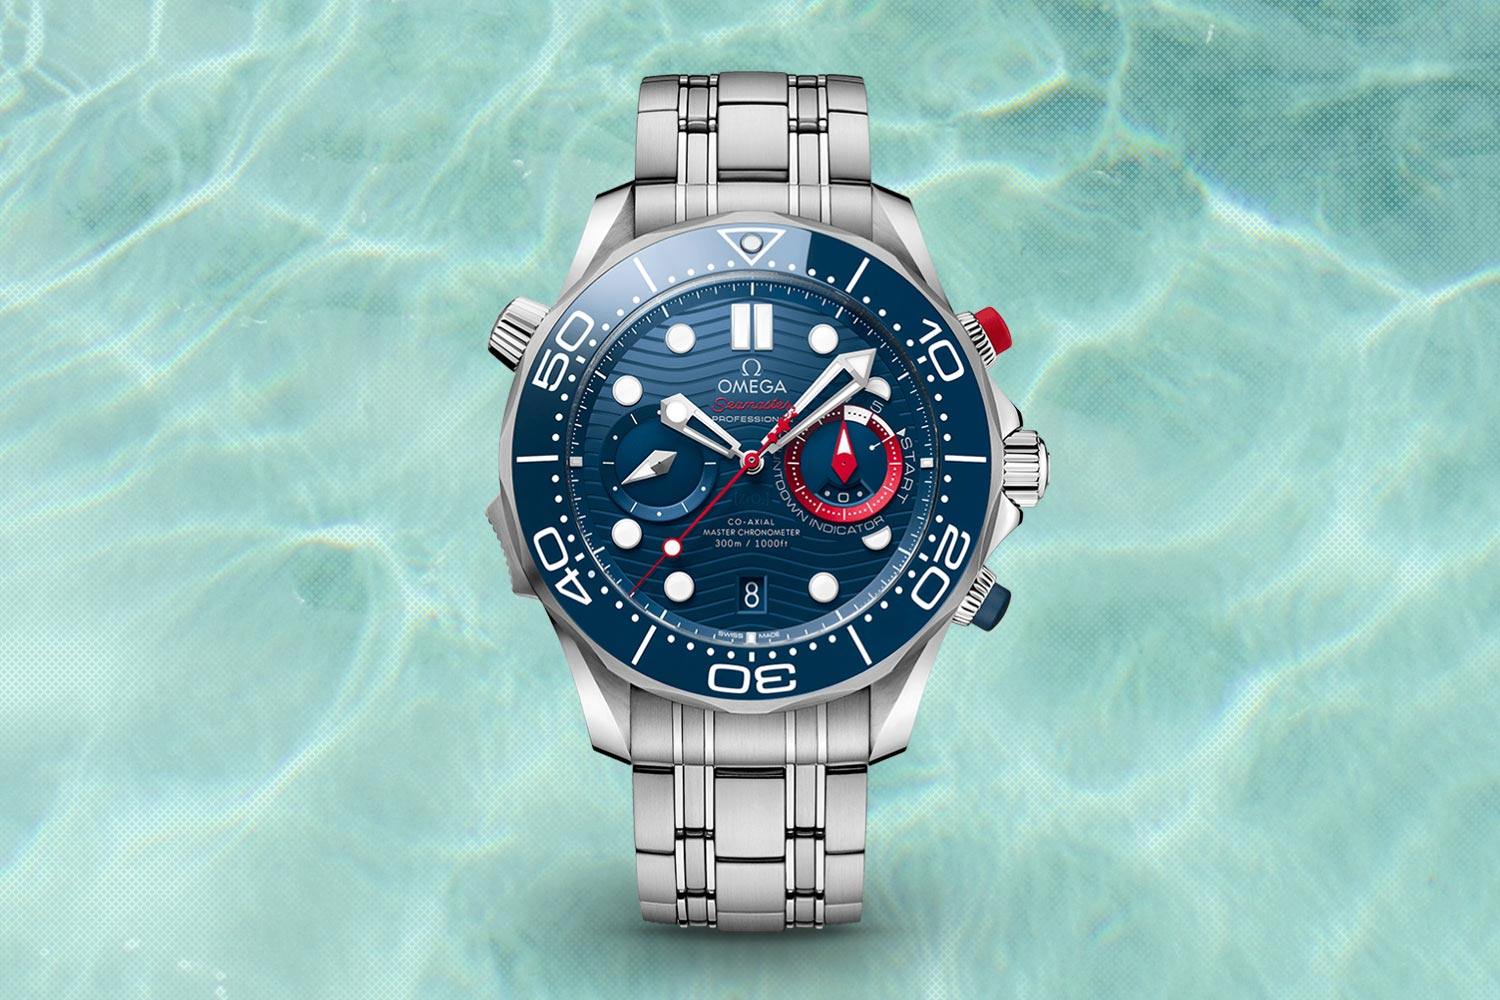 New OMEGA Seamaster Diver 300M America's Cup Chronograph is Race-Ready